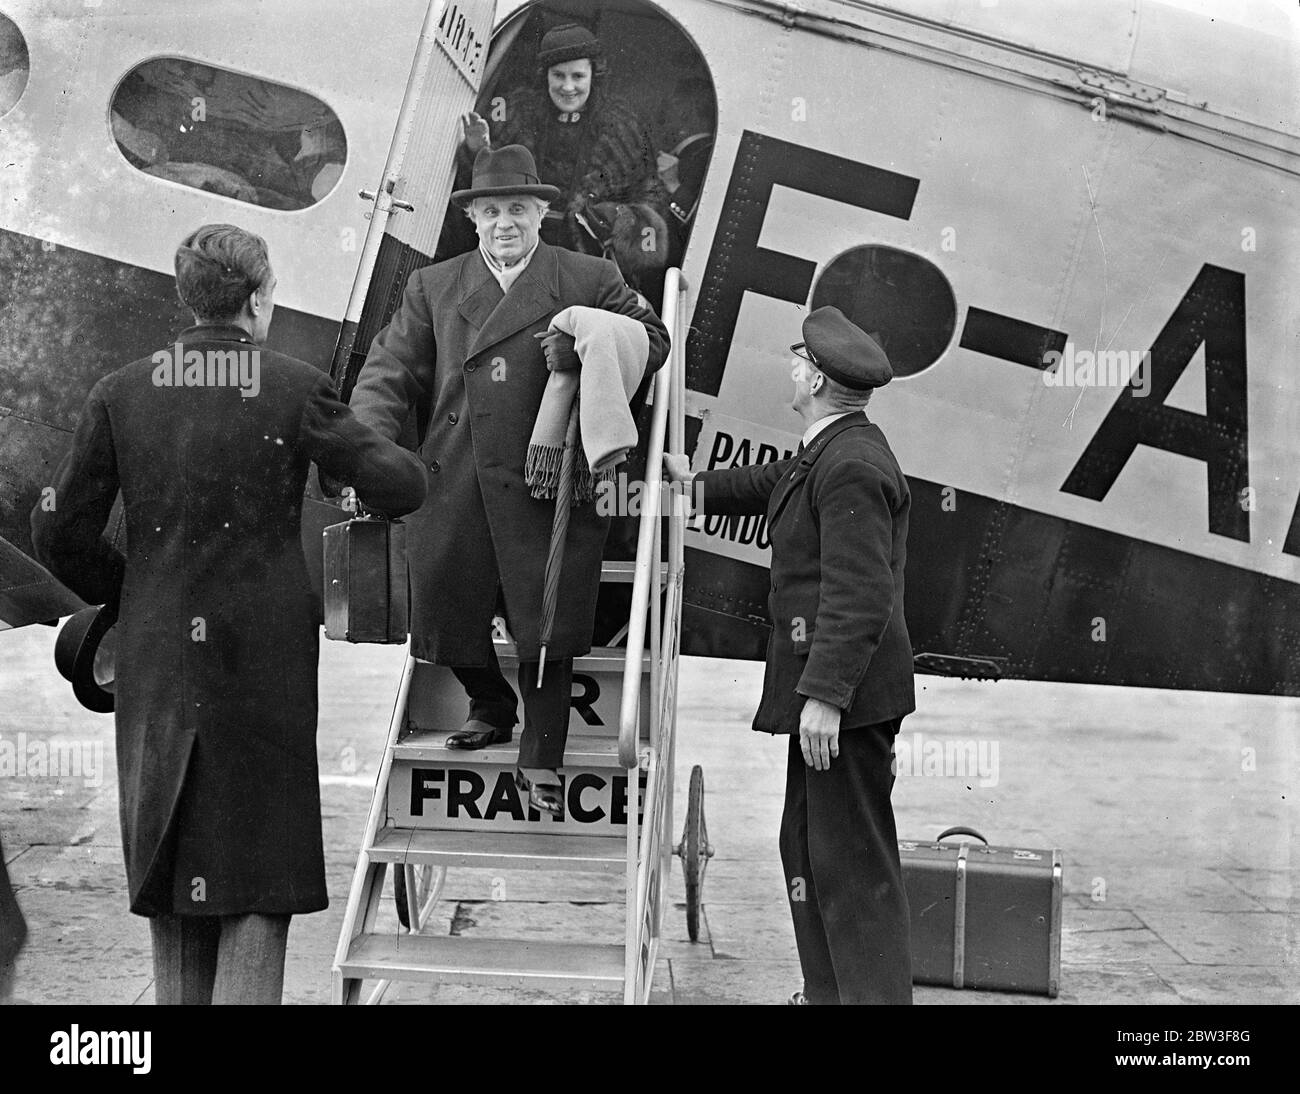 M Paul Boncour arrives at Croydon by air for League Council meeting . M Paul Boncour , French Minister of State , arrived at Croydon by air to attend the meeting of the League Council in St James in St James ' s Palace tomorrow ( Saturday ) when the Rhineland situation will be discussed . Photo shows , M Paul Boncour leaving the plane on arrival at Croydon . 13 March 1936 Stock Photo